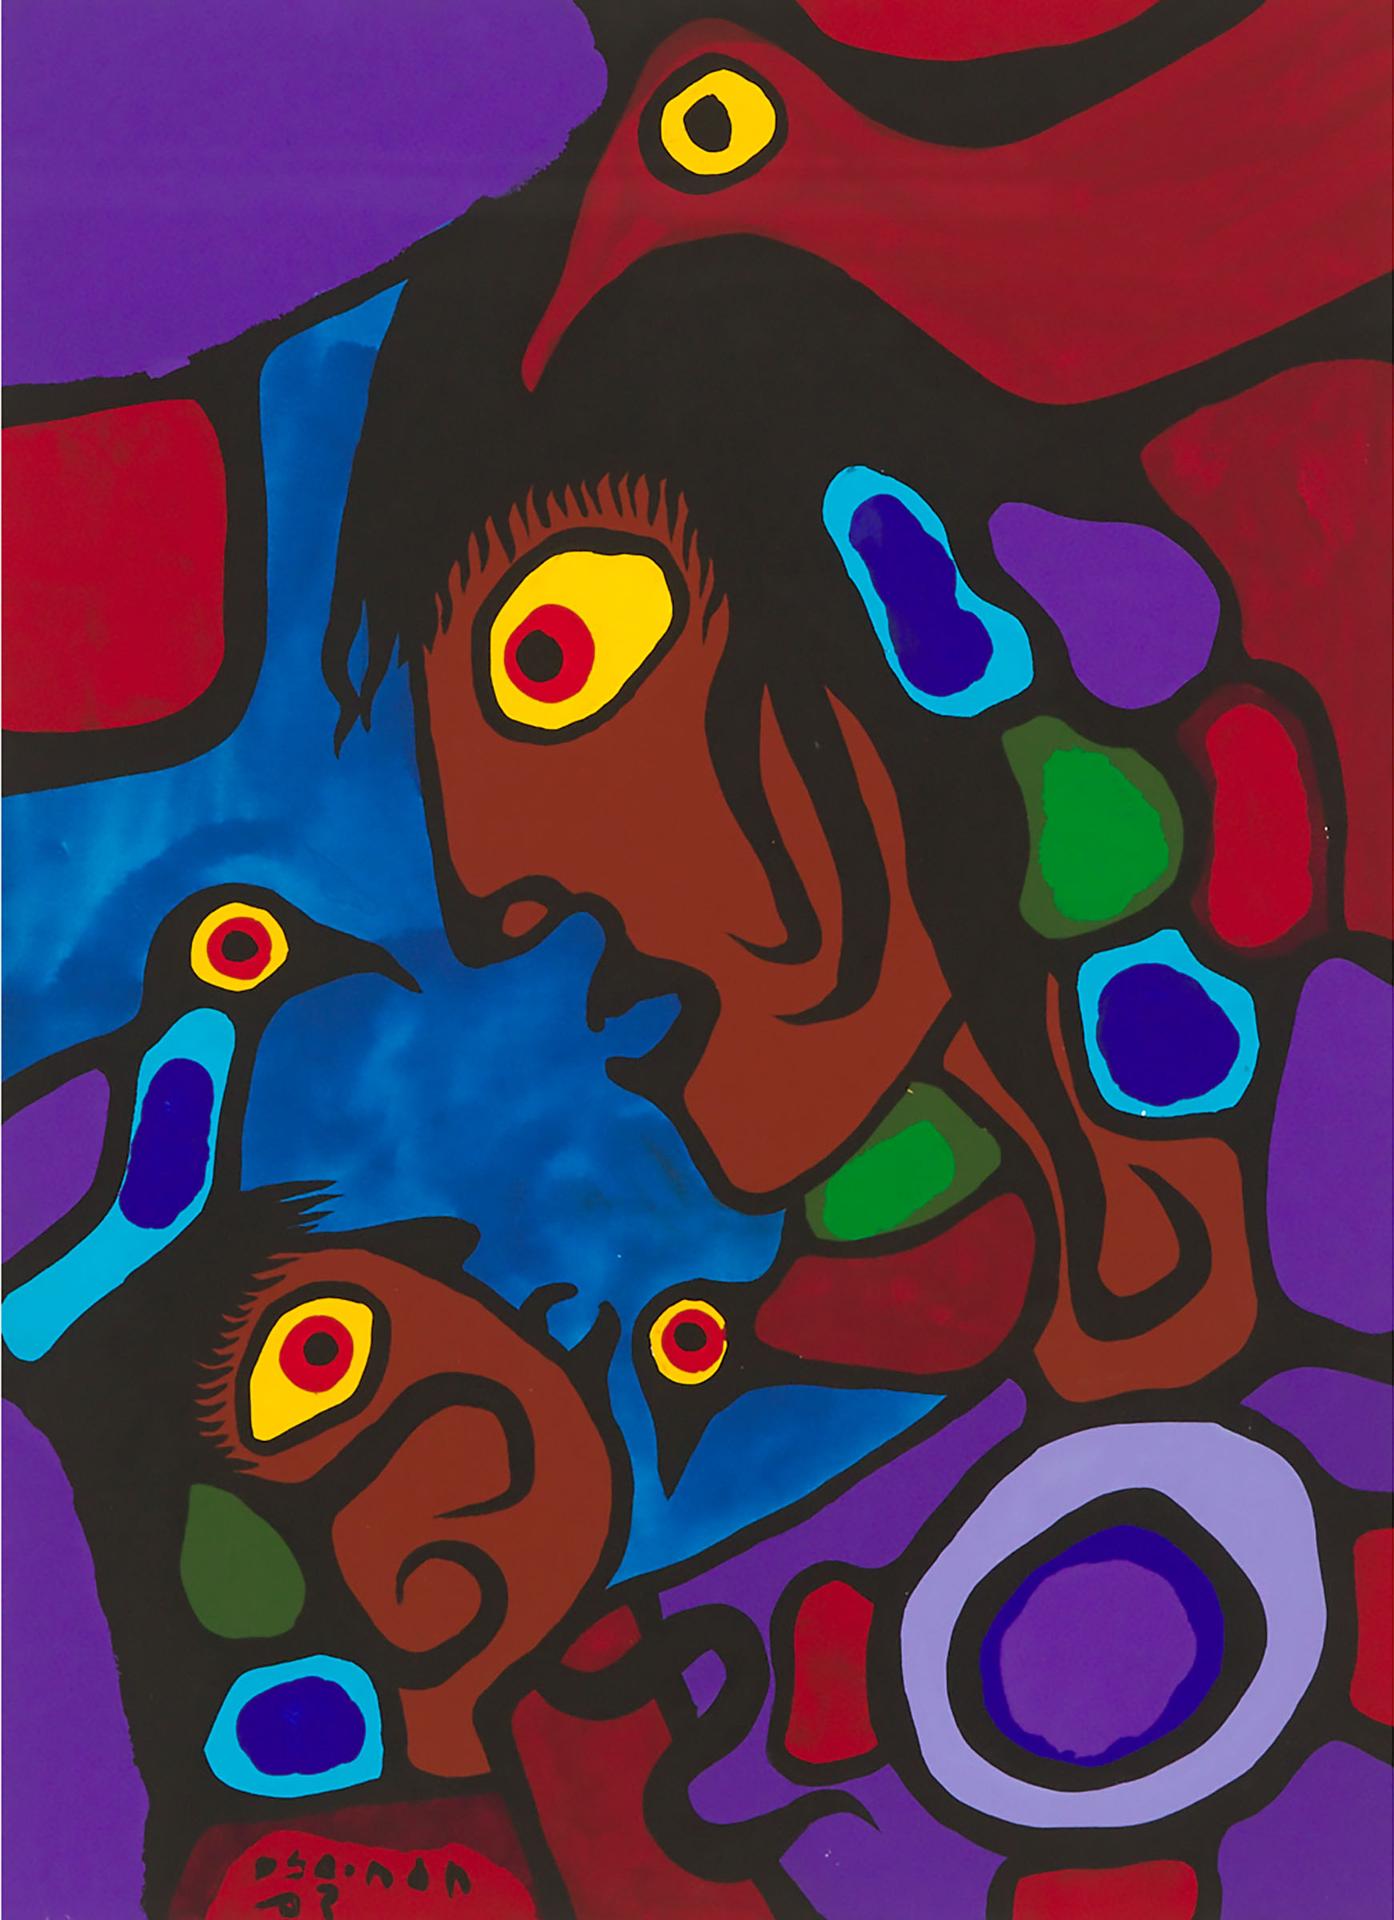 Norval H. Morrisseau (1931-2007) - Son, This Is Where It's All At